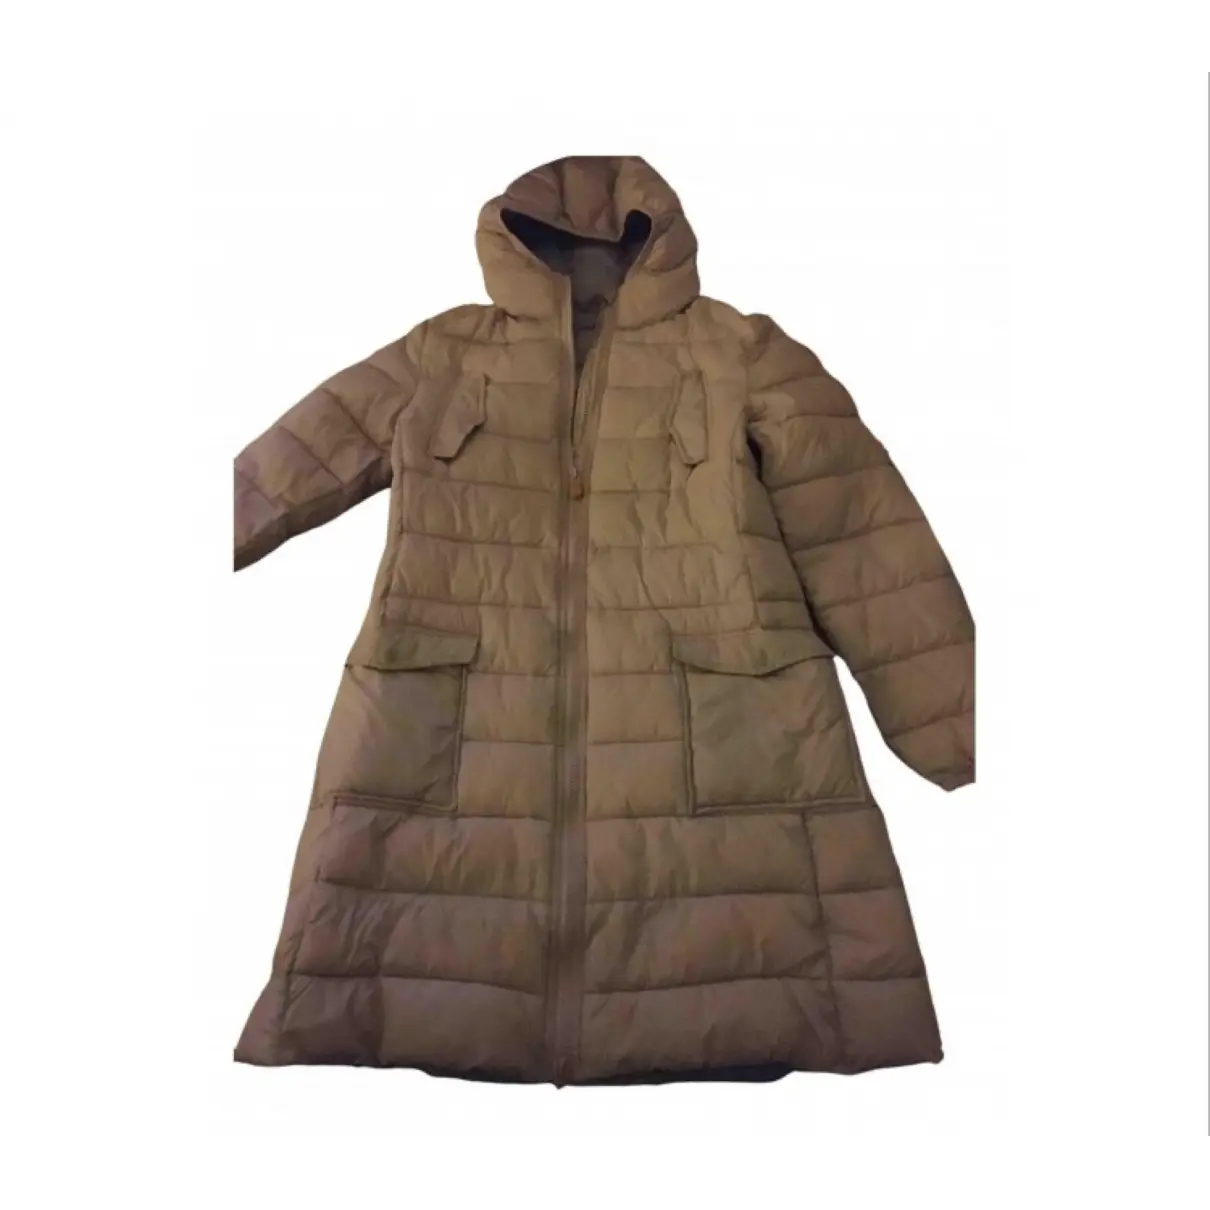 Buy Save the Duck Puffer online